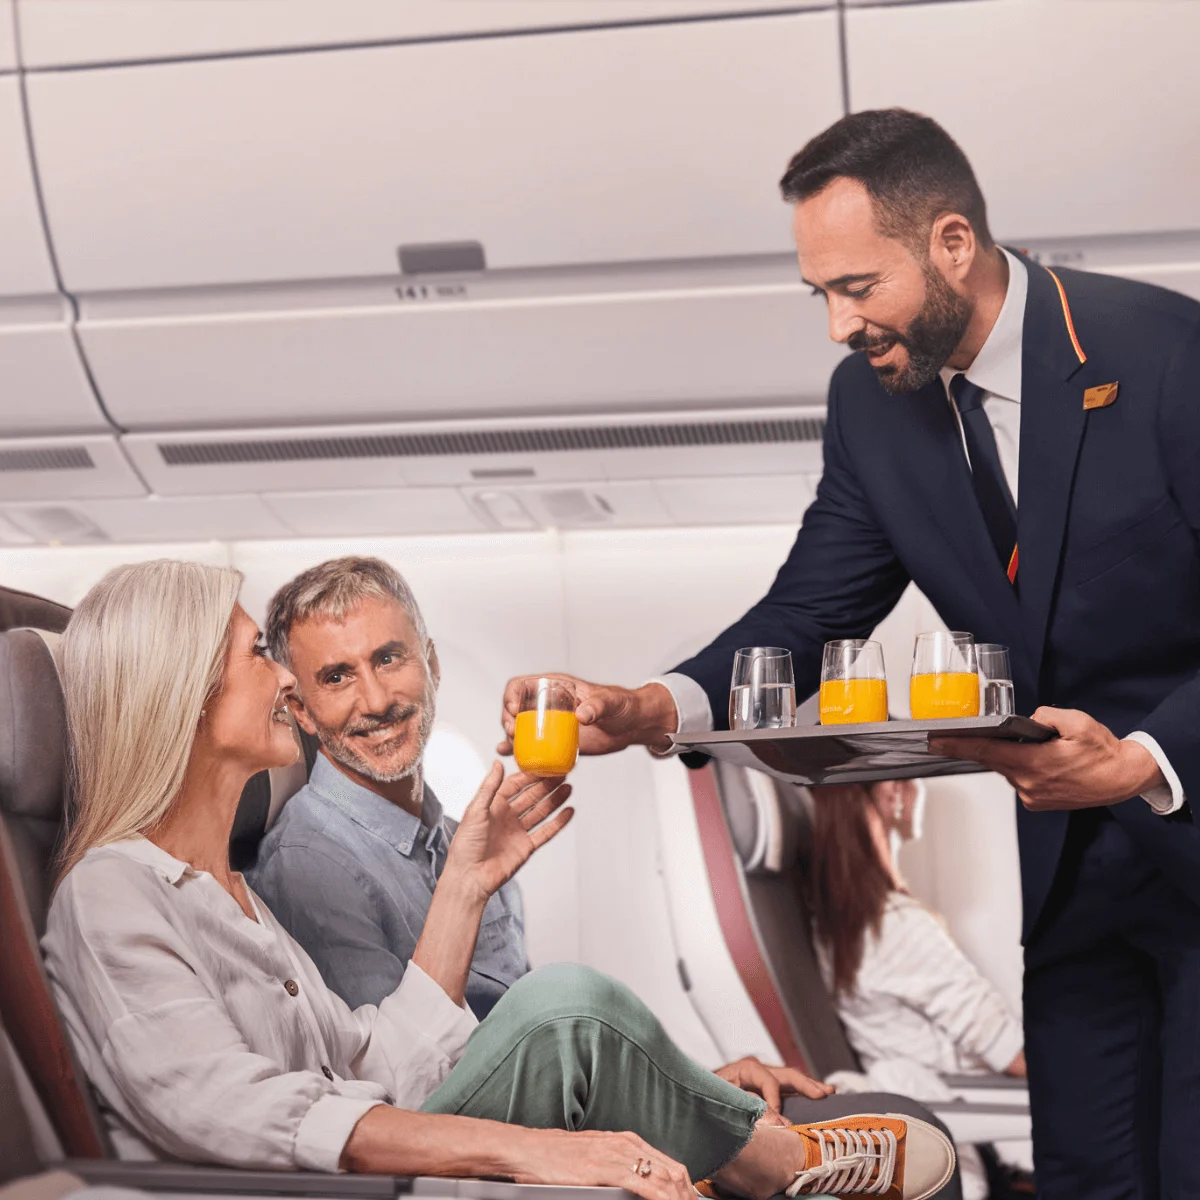 A uniformed Iberia crew member hands two passengers a drink while onboard an aircraft